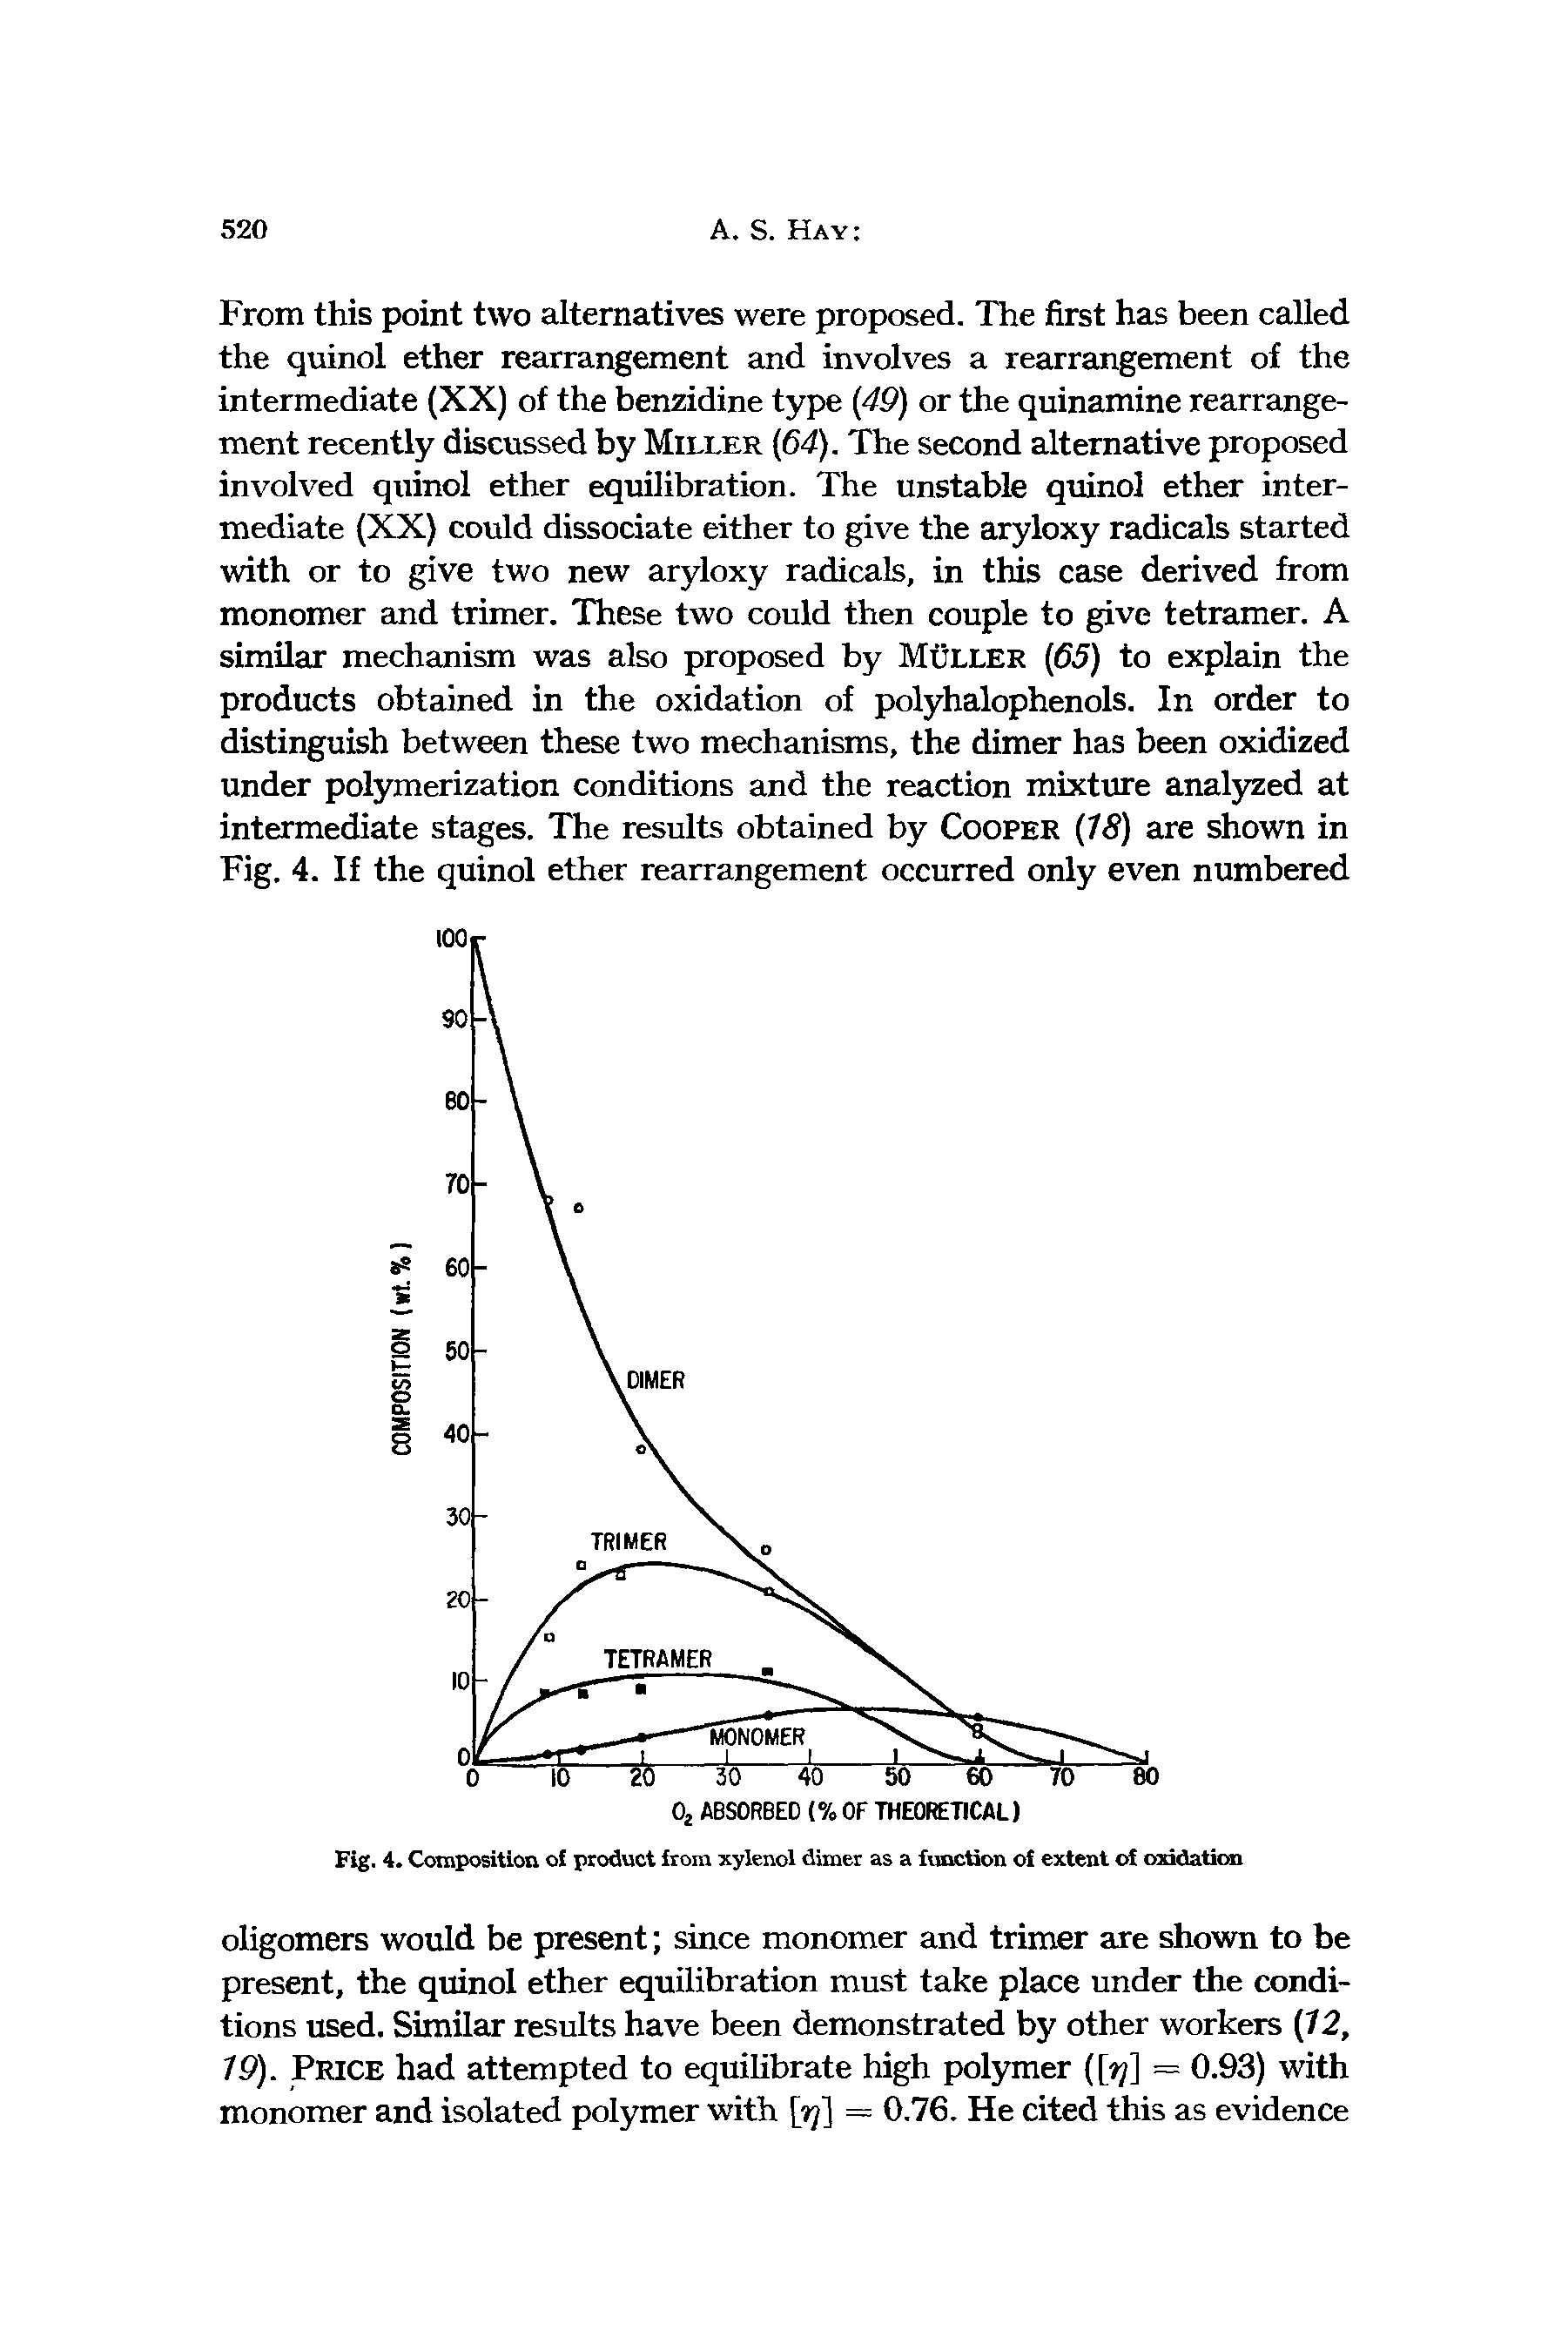 Fig. 4. Composition of product from xylenol dimer as a function of extent of oxidation...